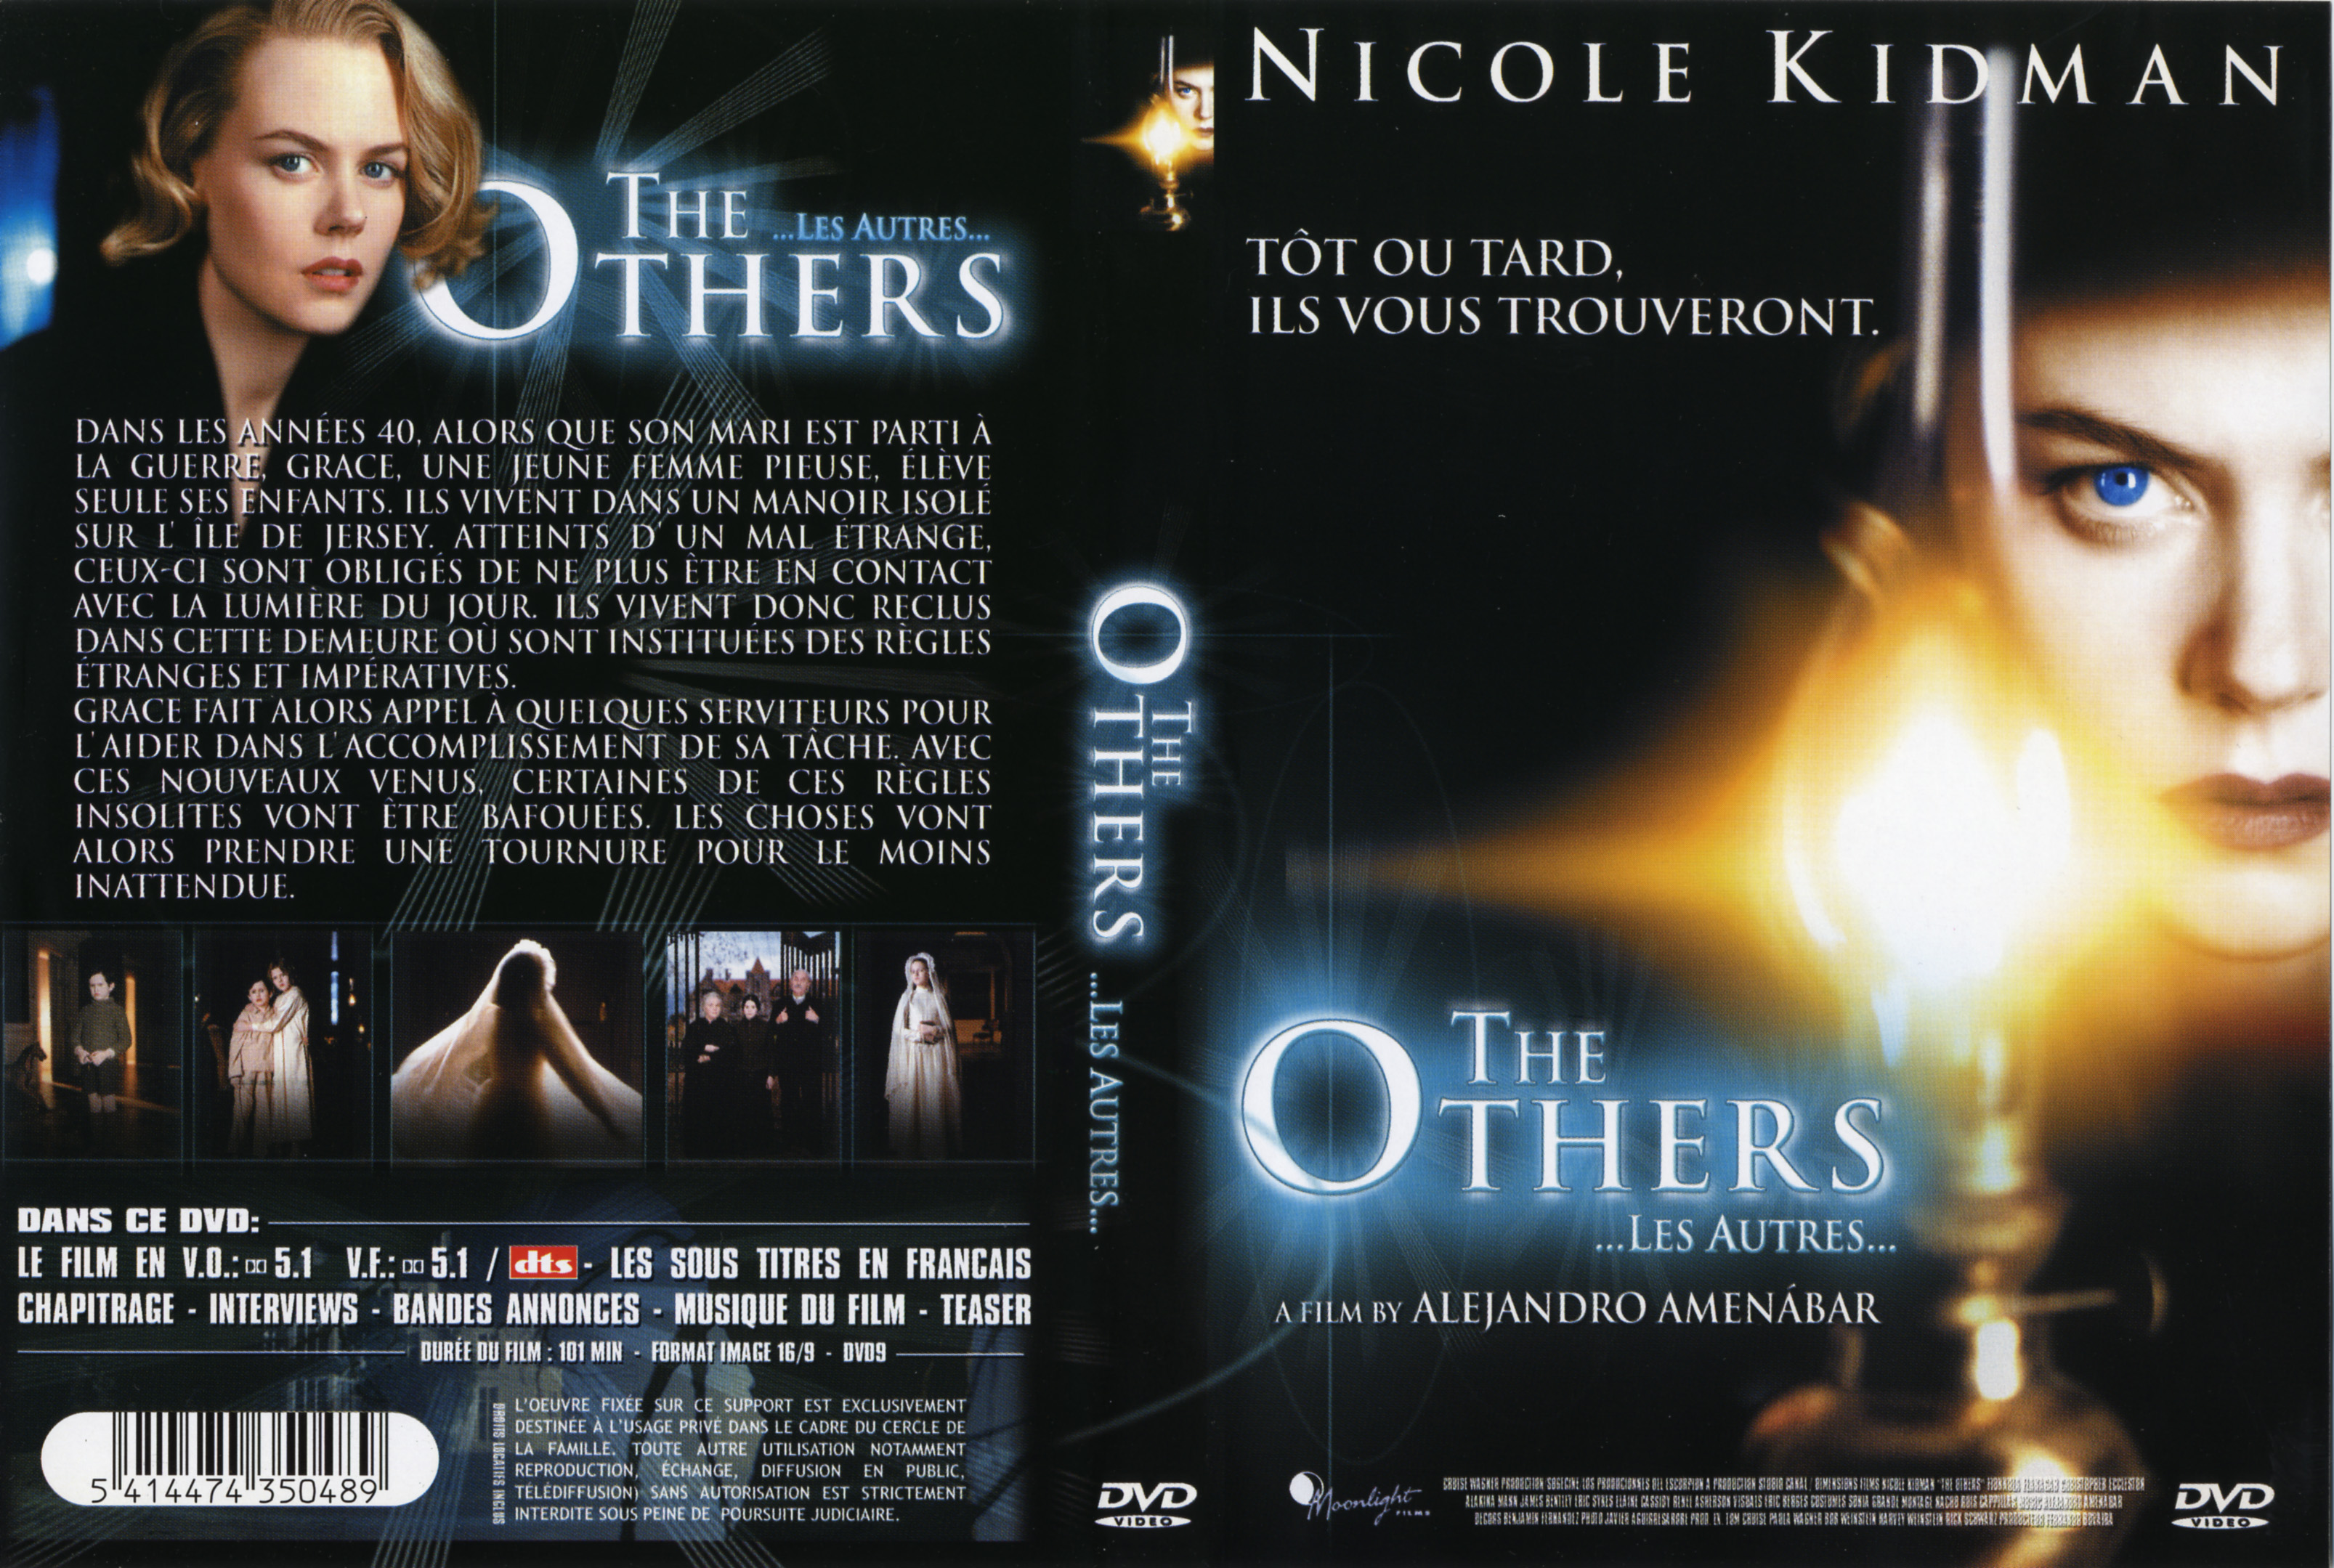 Jaquette DVD The others